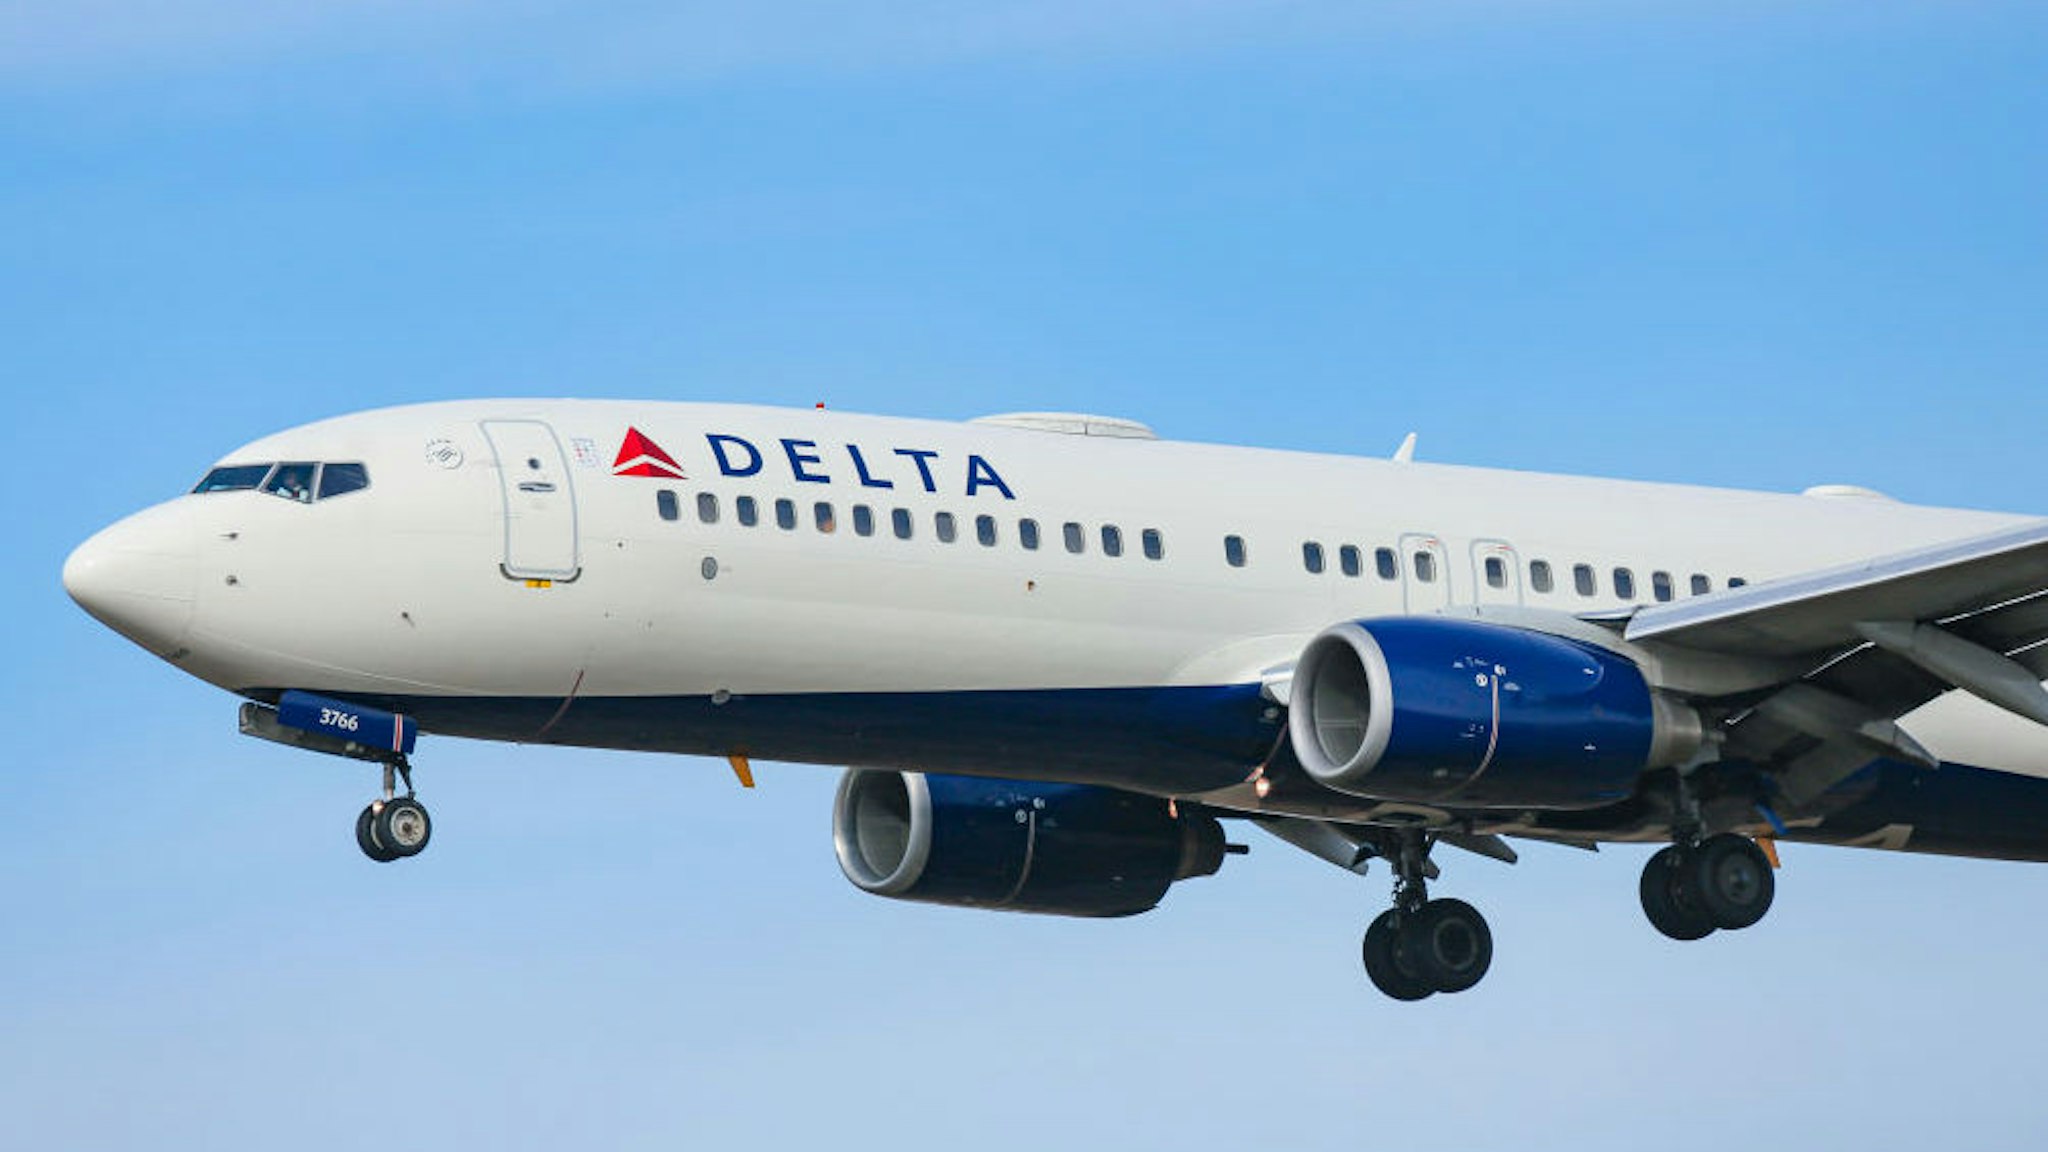 Delta Air Lines Boeing 737-800 commercial aircraft as seen on final approach landing at New York JFK John F Kennedy International airport in NY, USA on February 13, 2020.